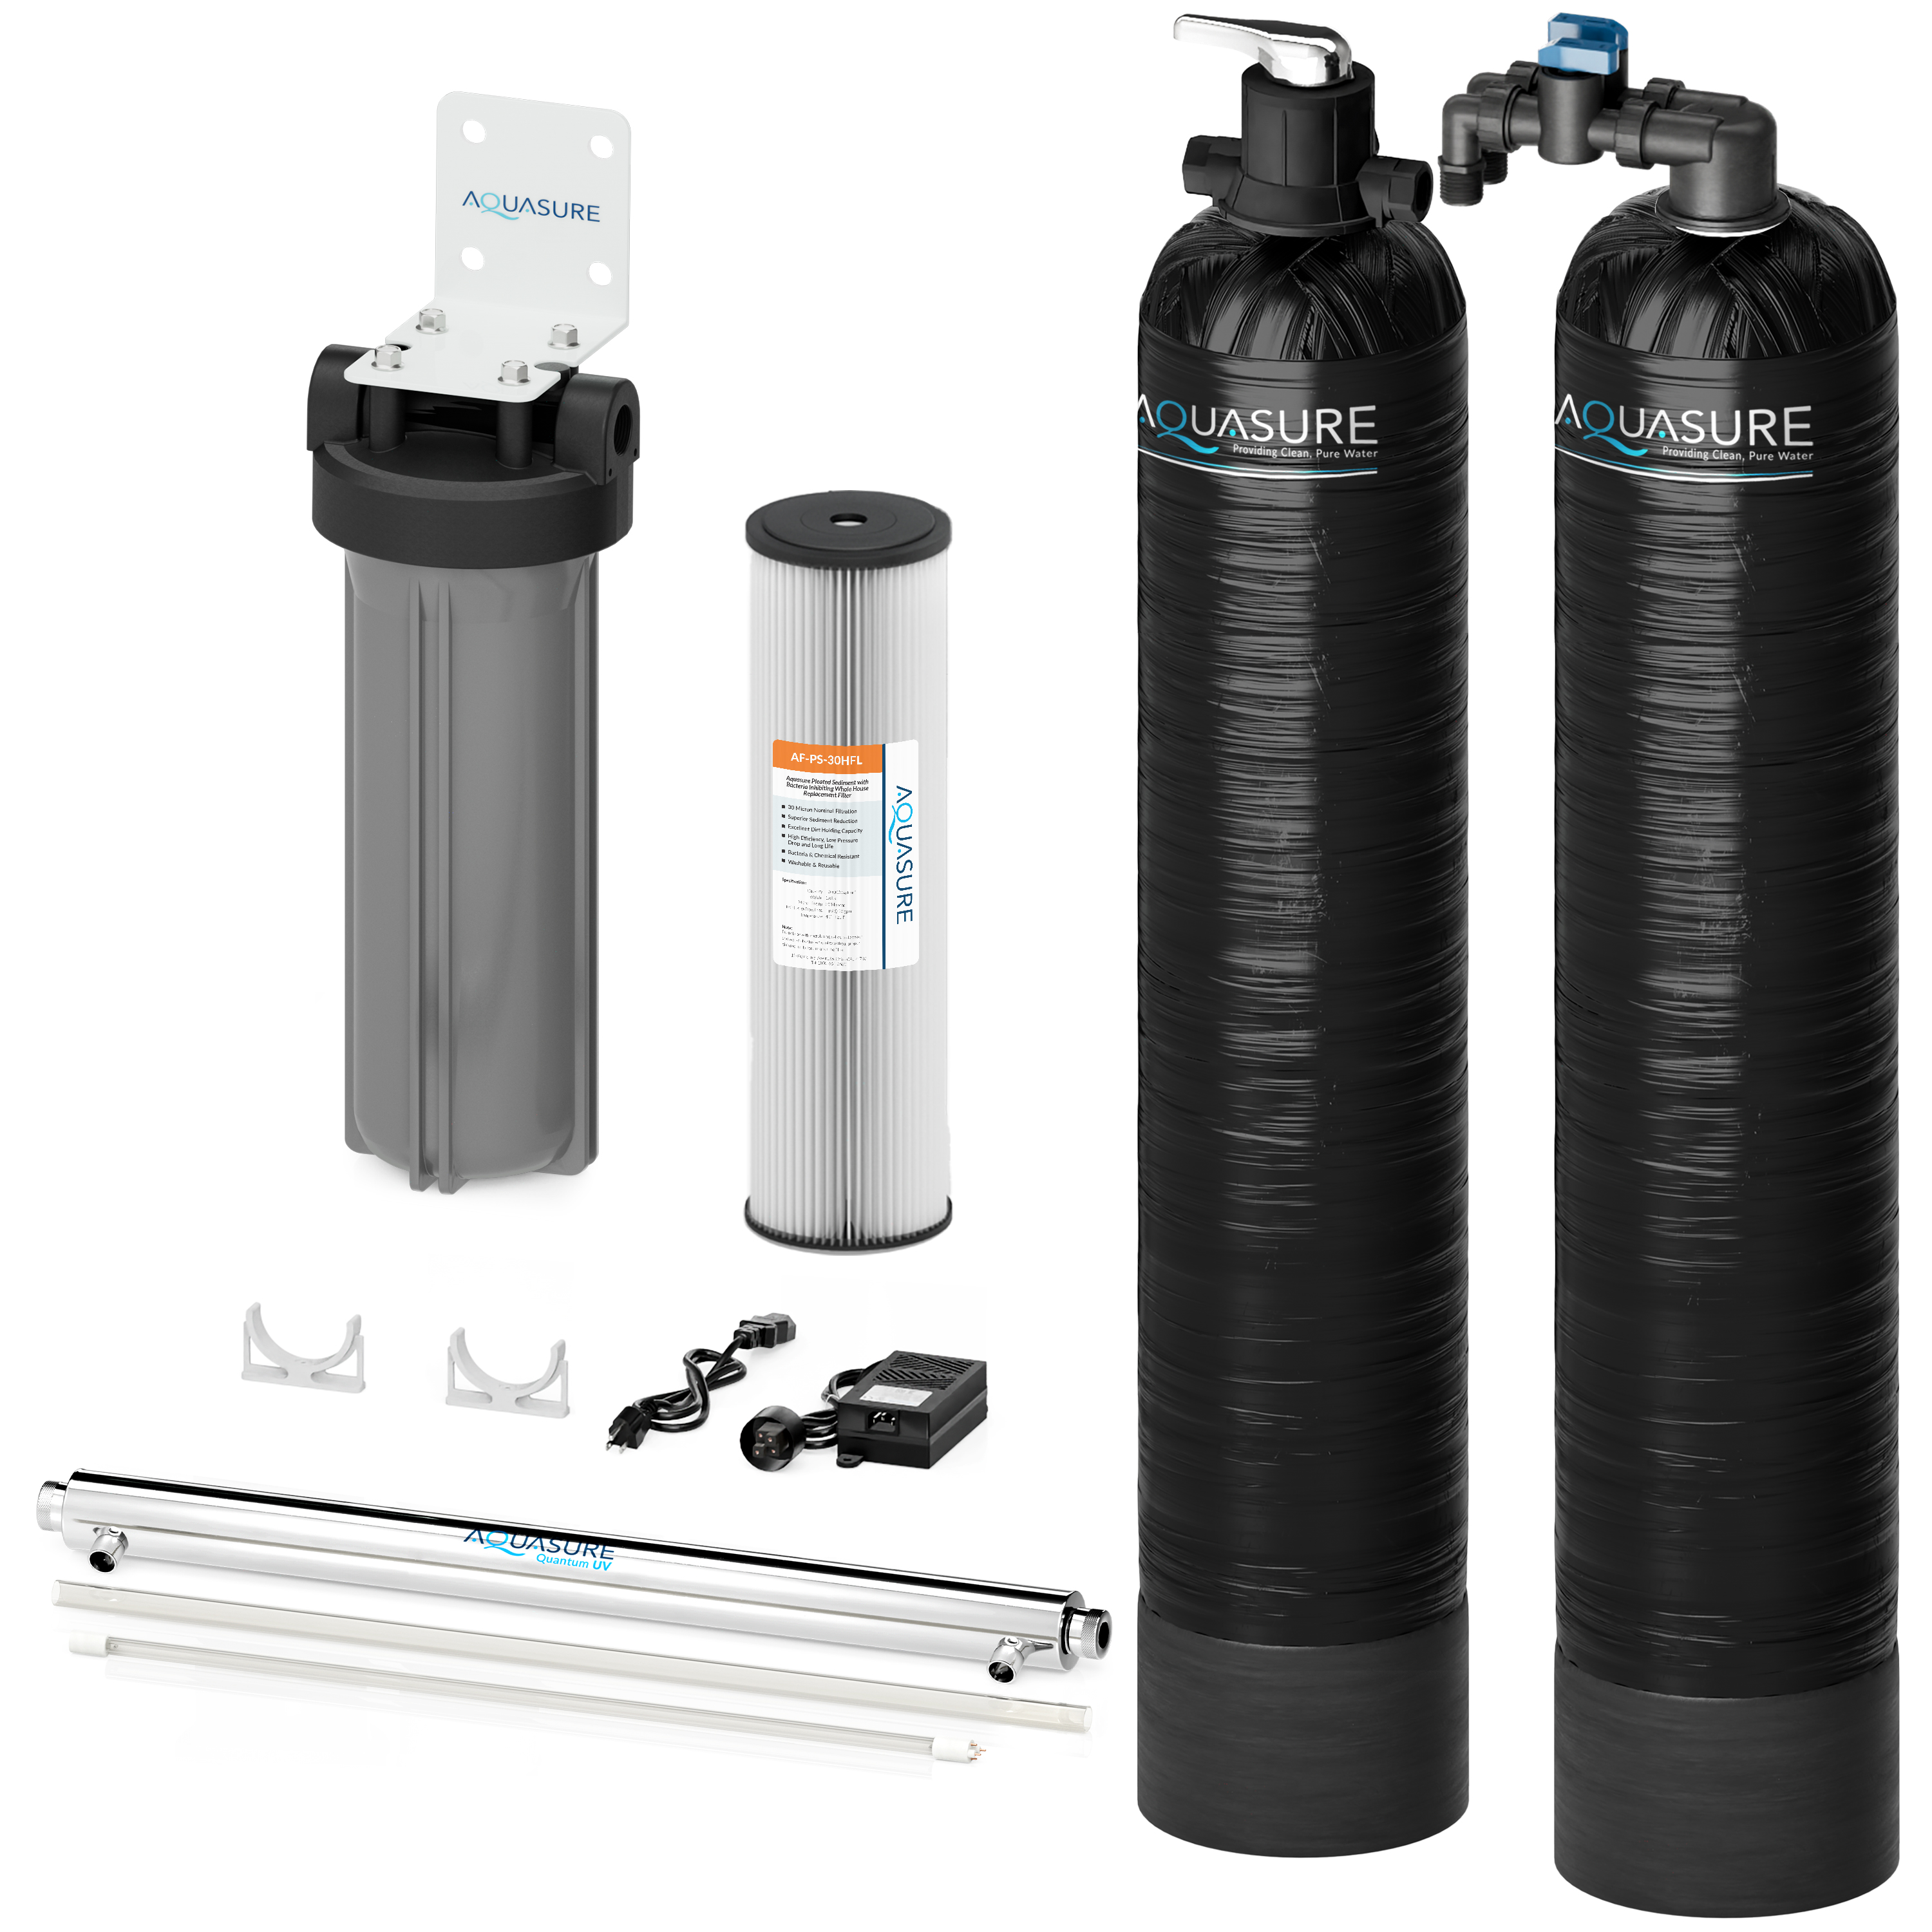 Aquasure Serene 15 GPM Salt-Free Conditioning, Whole House Water Treatment System, Pleated Sediment Pre-Filter and UV Sterilizer